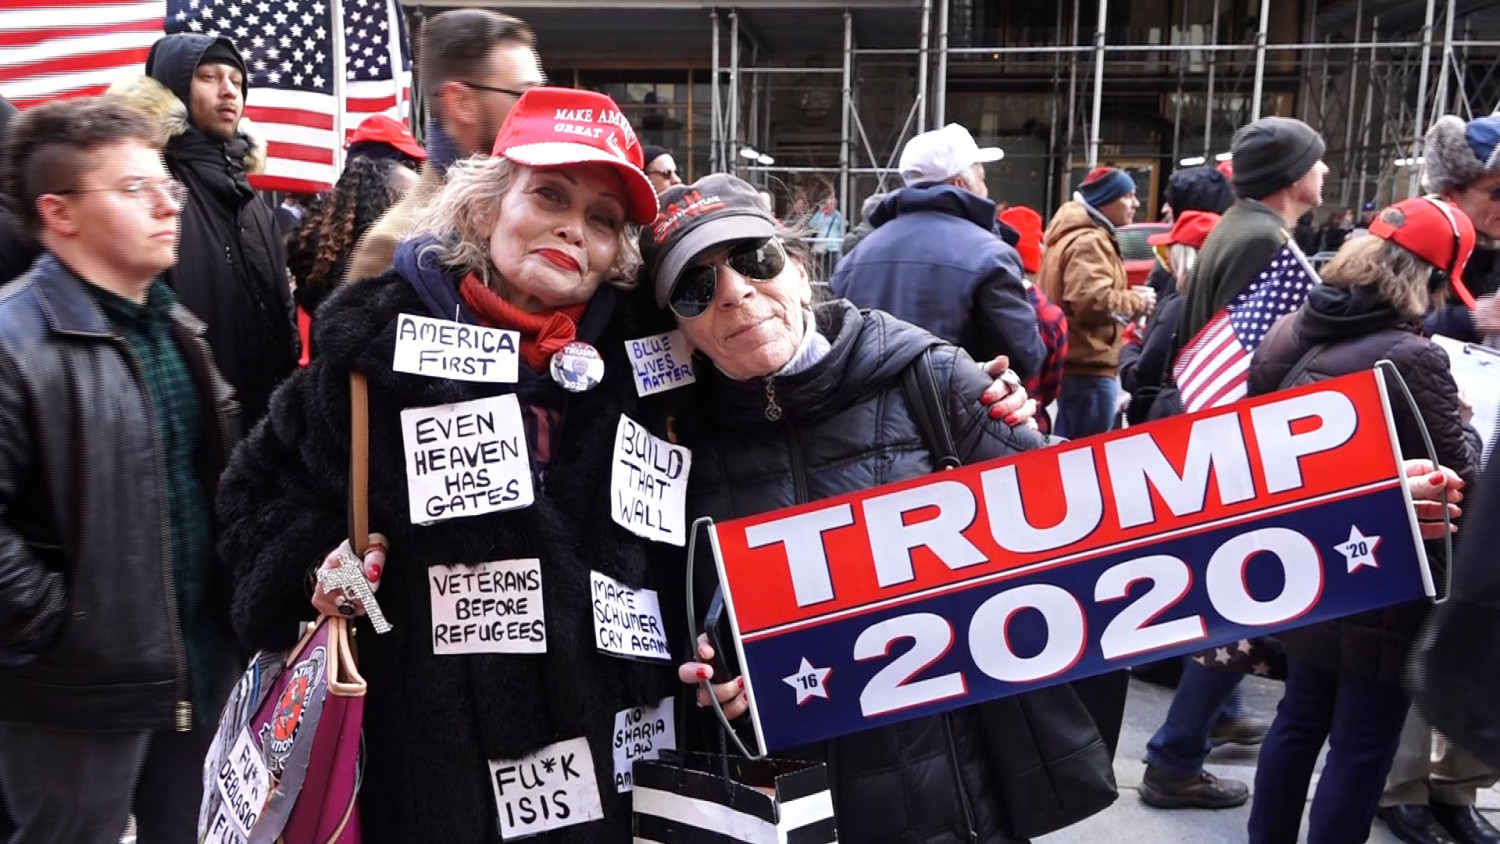 Trump Supporters Gather at Trump Tower With Message for New York City